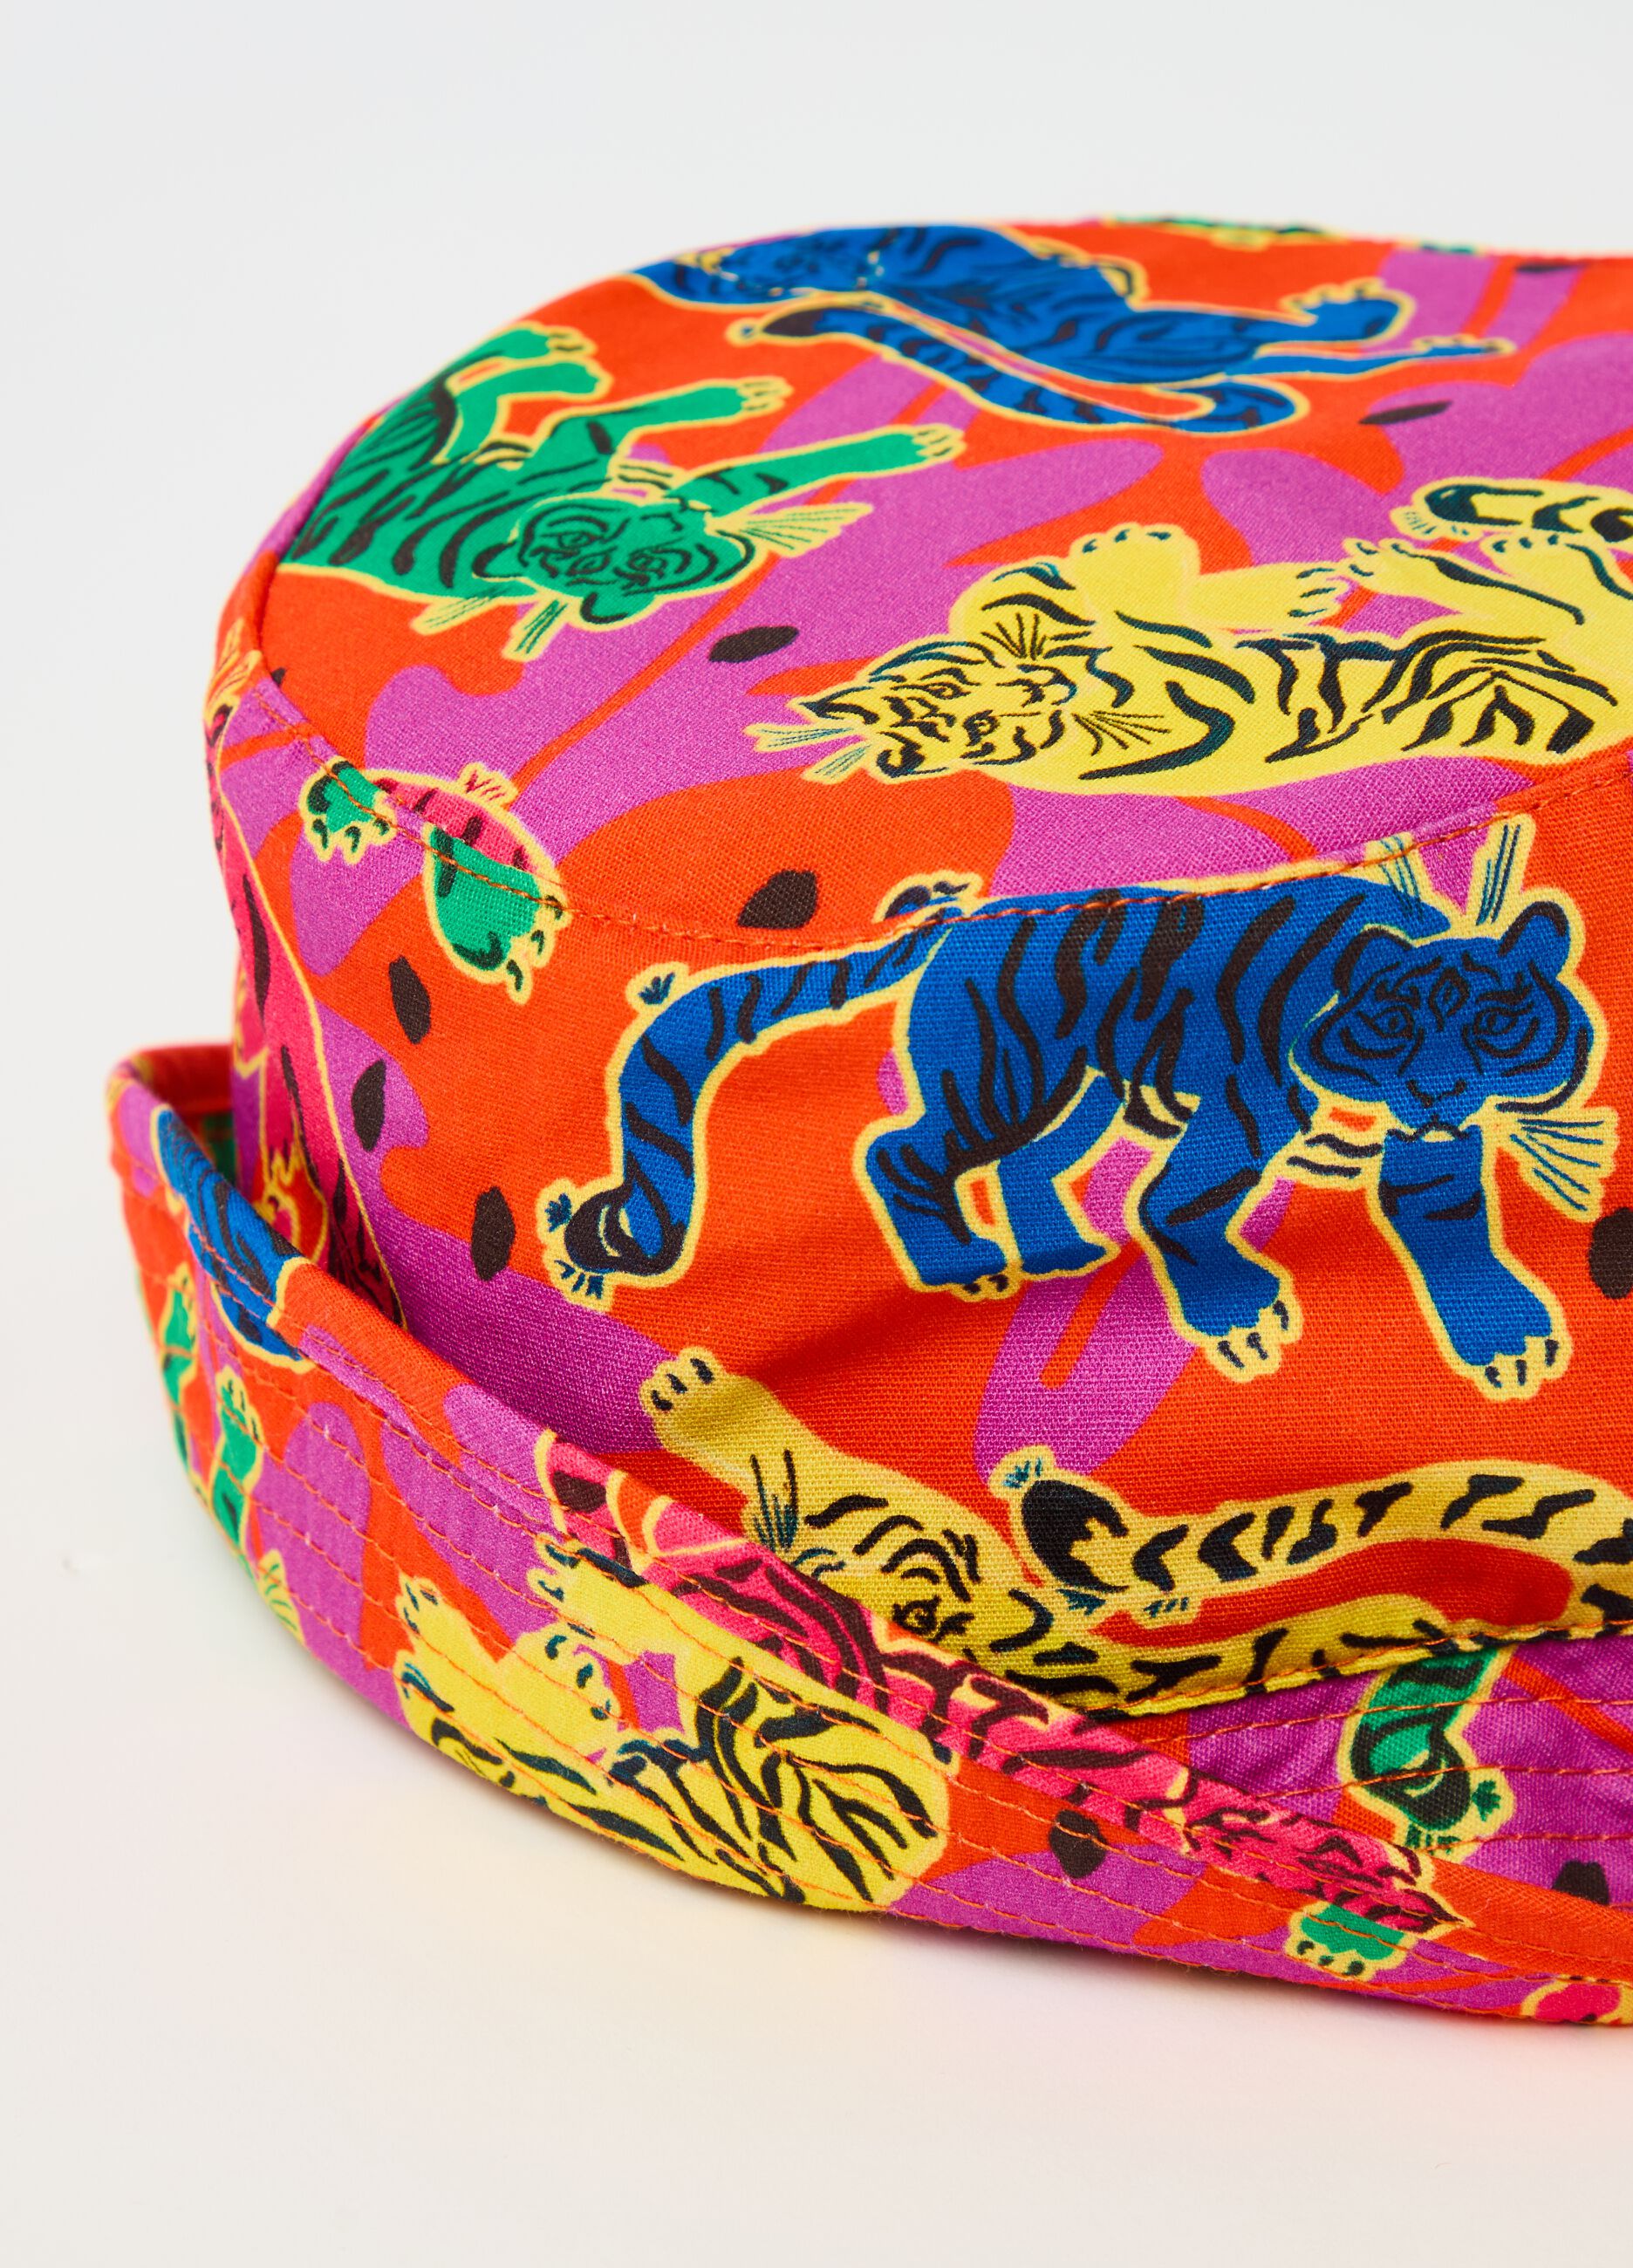 Fishing hat with tigers print